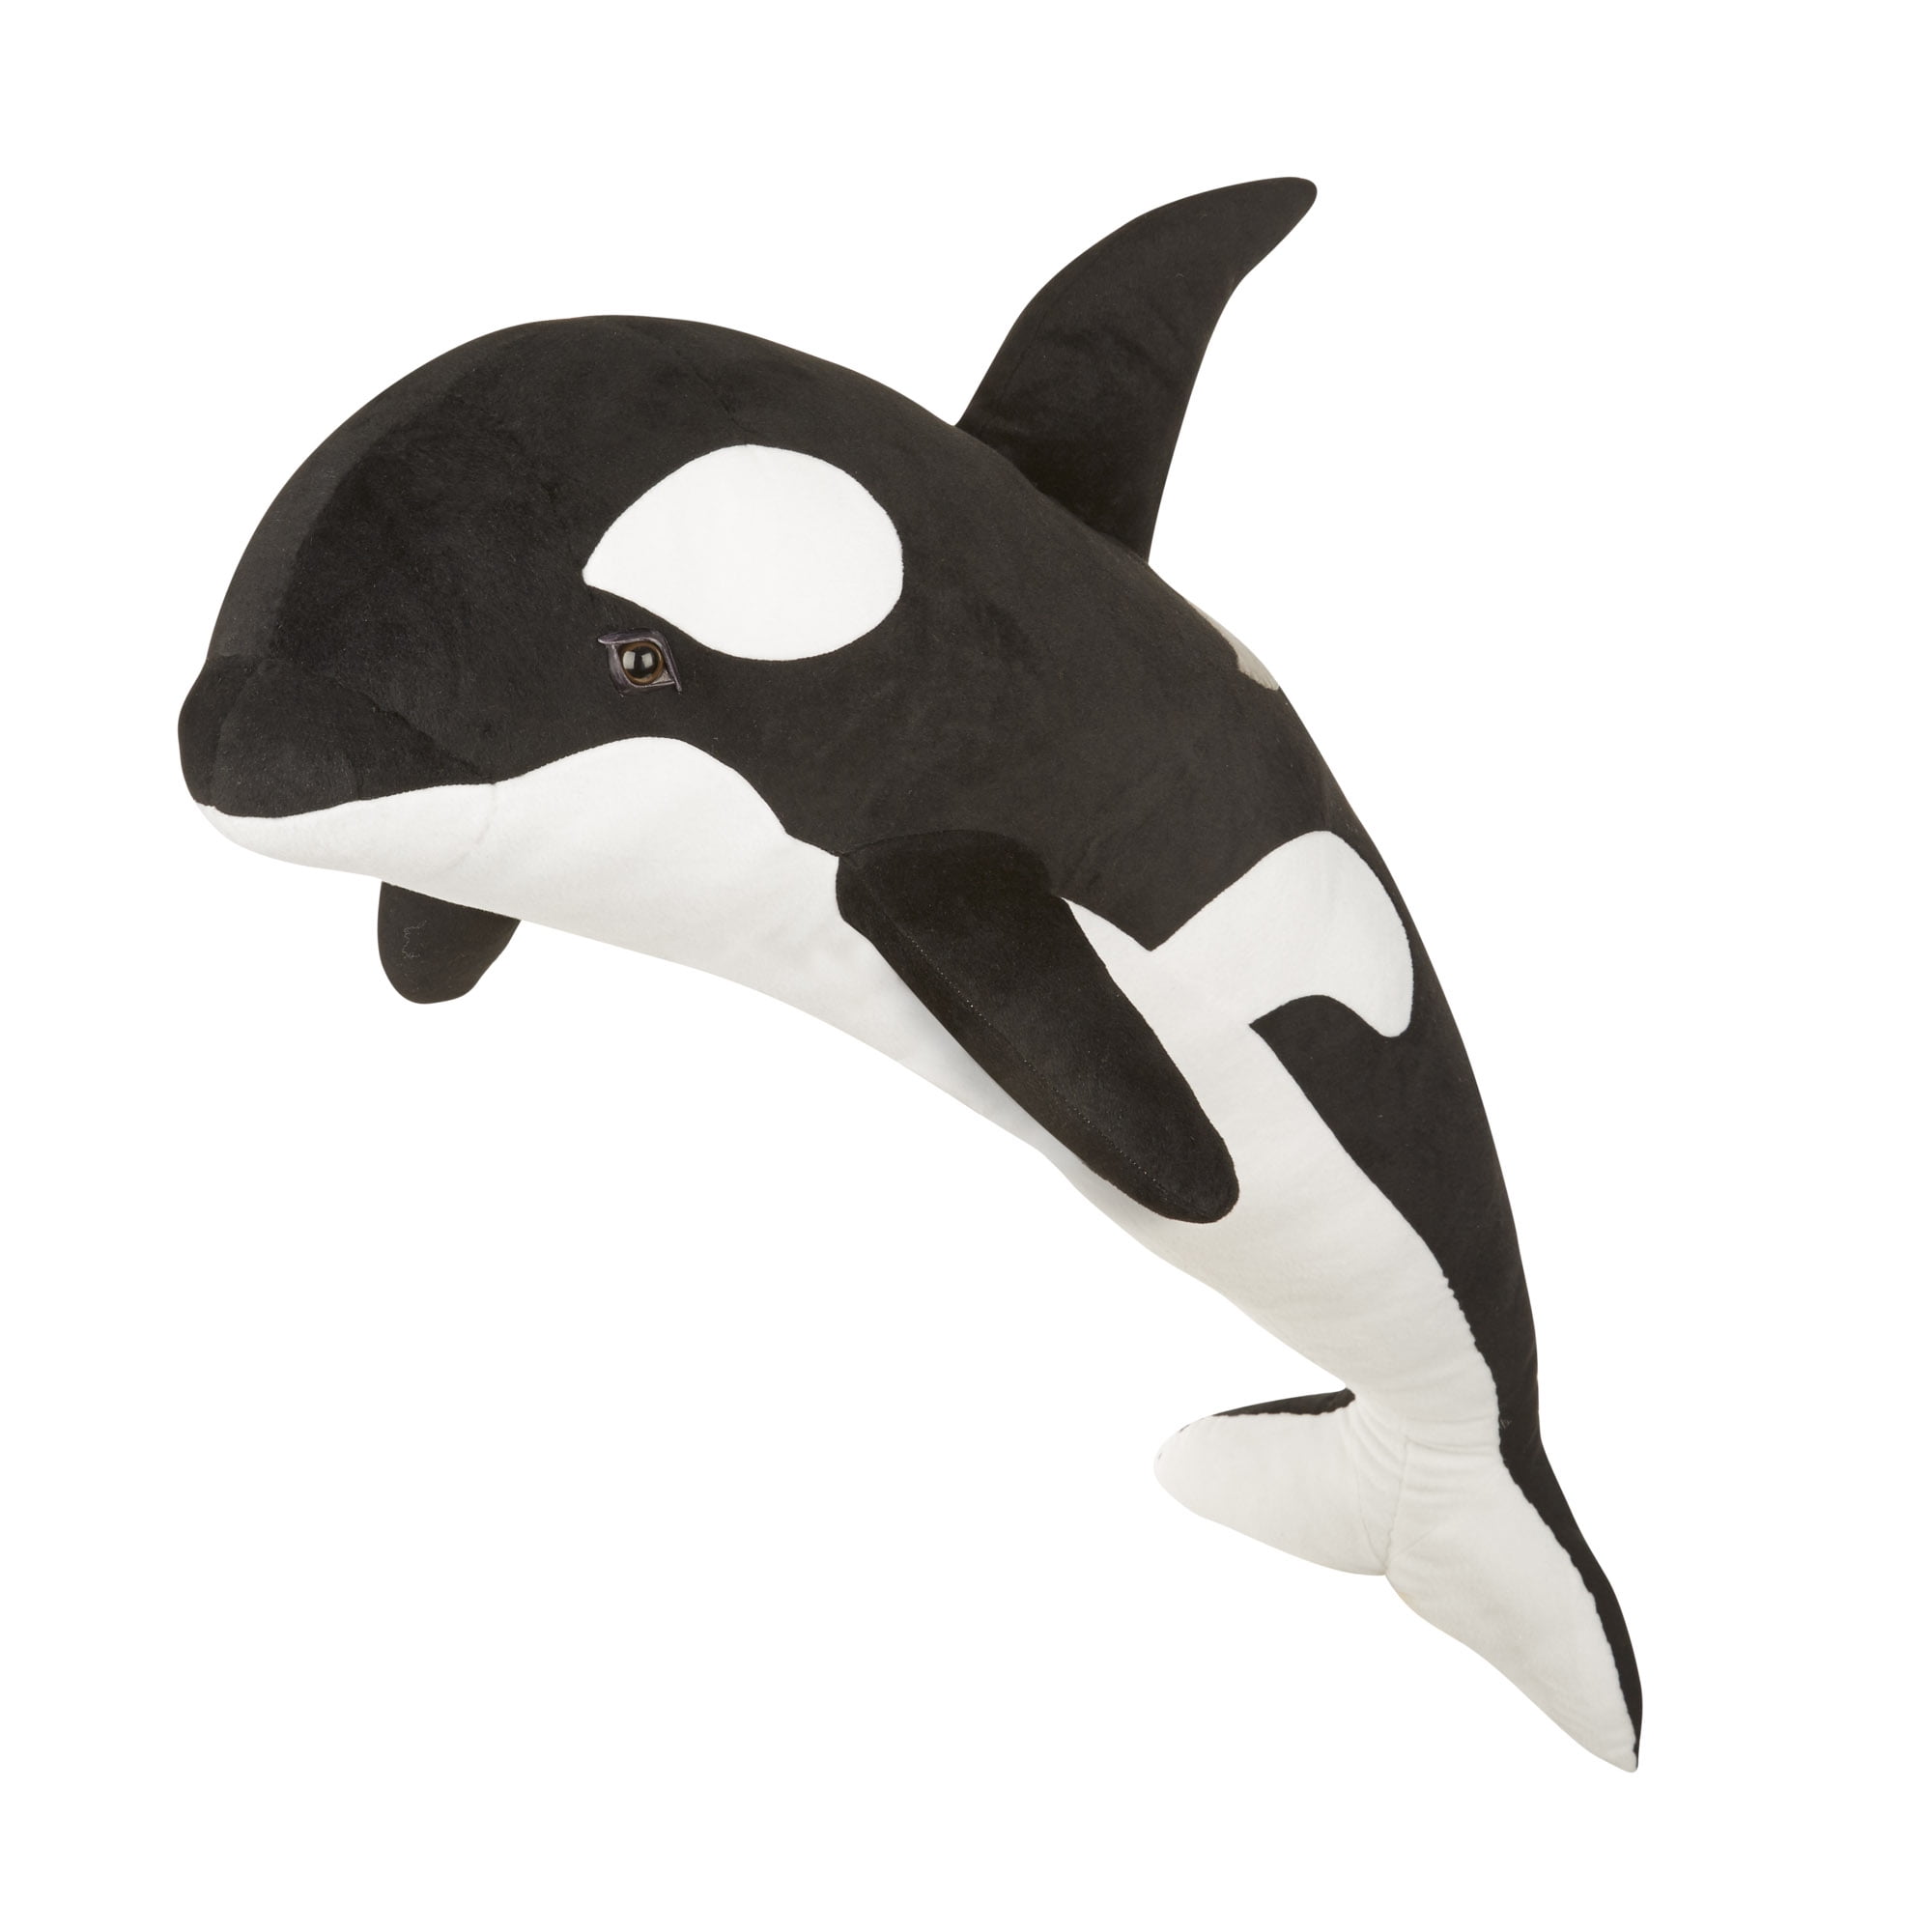 KILLER WHALE~ 3-D puzzle kit by PUZZLED ~ wood ~ 6 yrs+ 